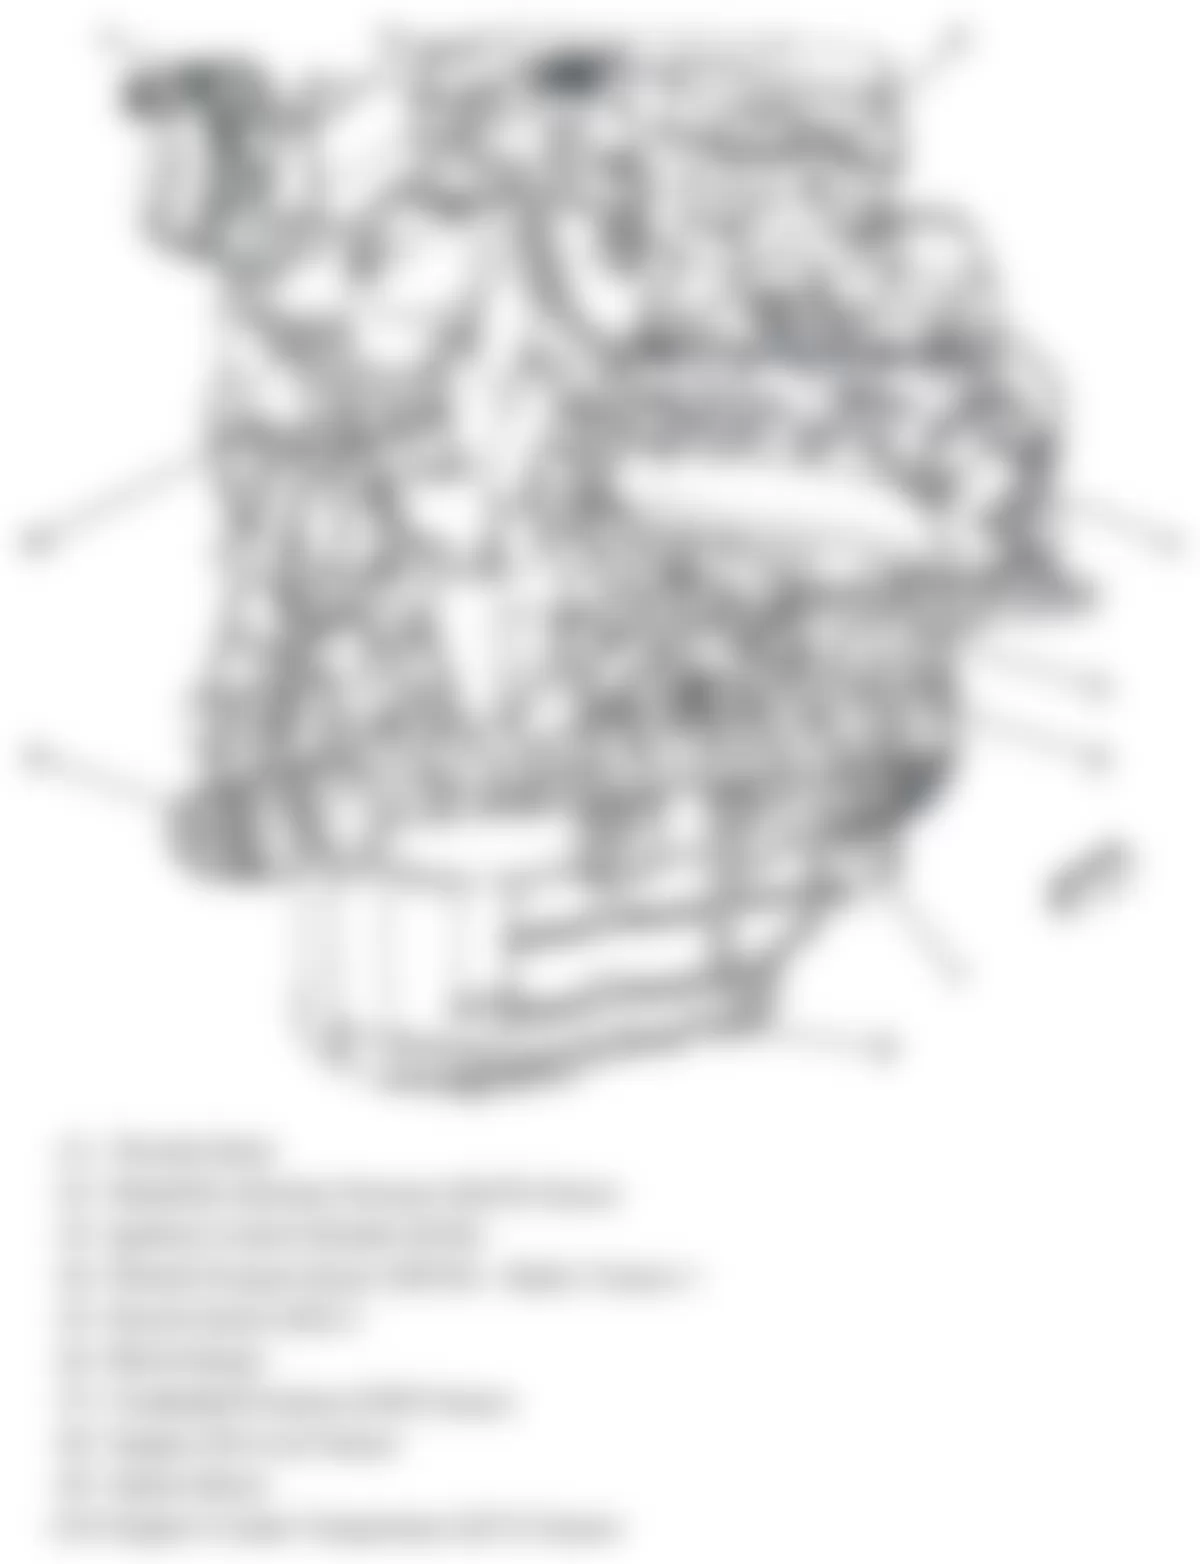 Buick Lucerne Super 2009 - Component Locations -  Right Side Of Engine (3.9L)